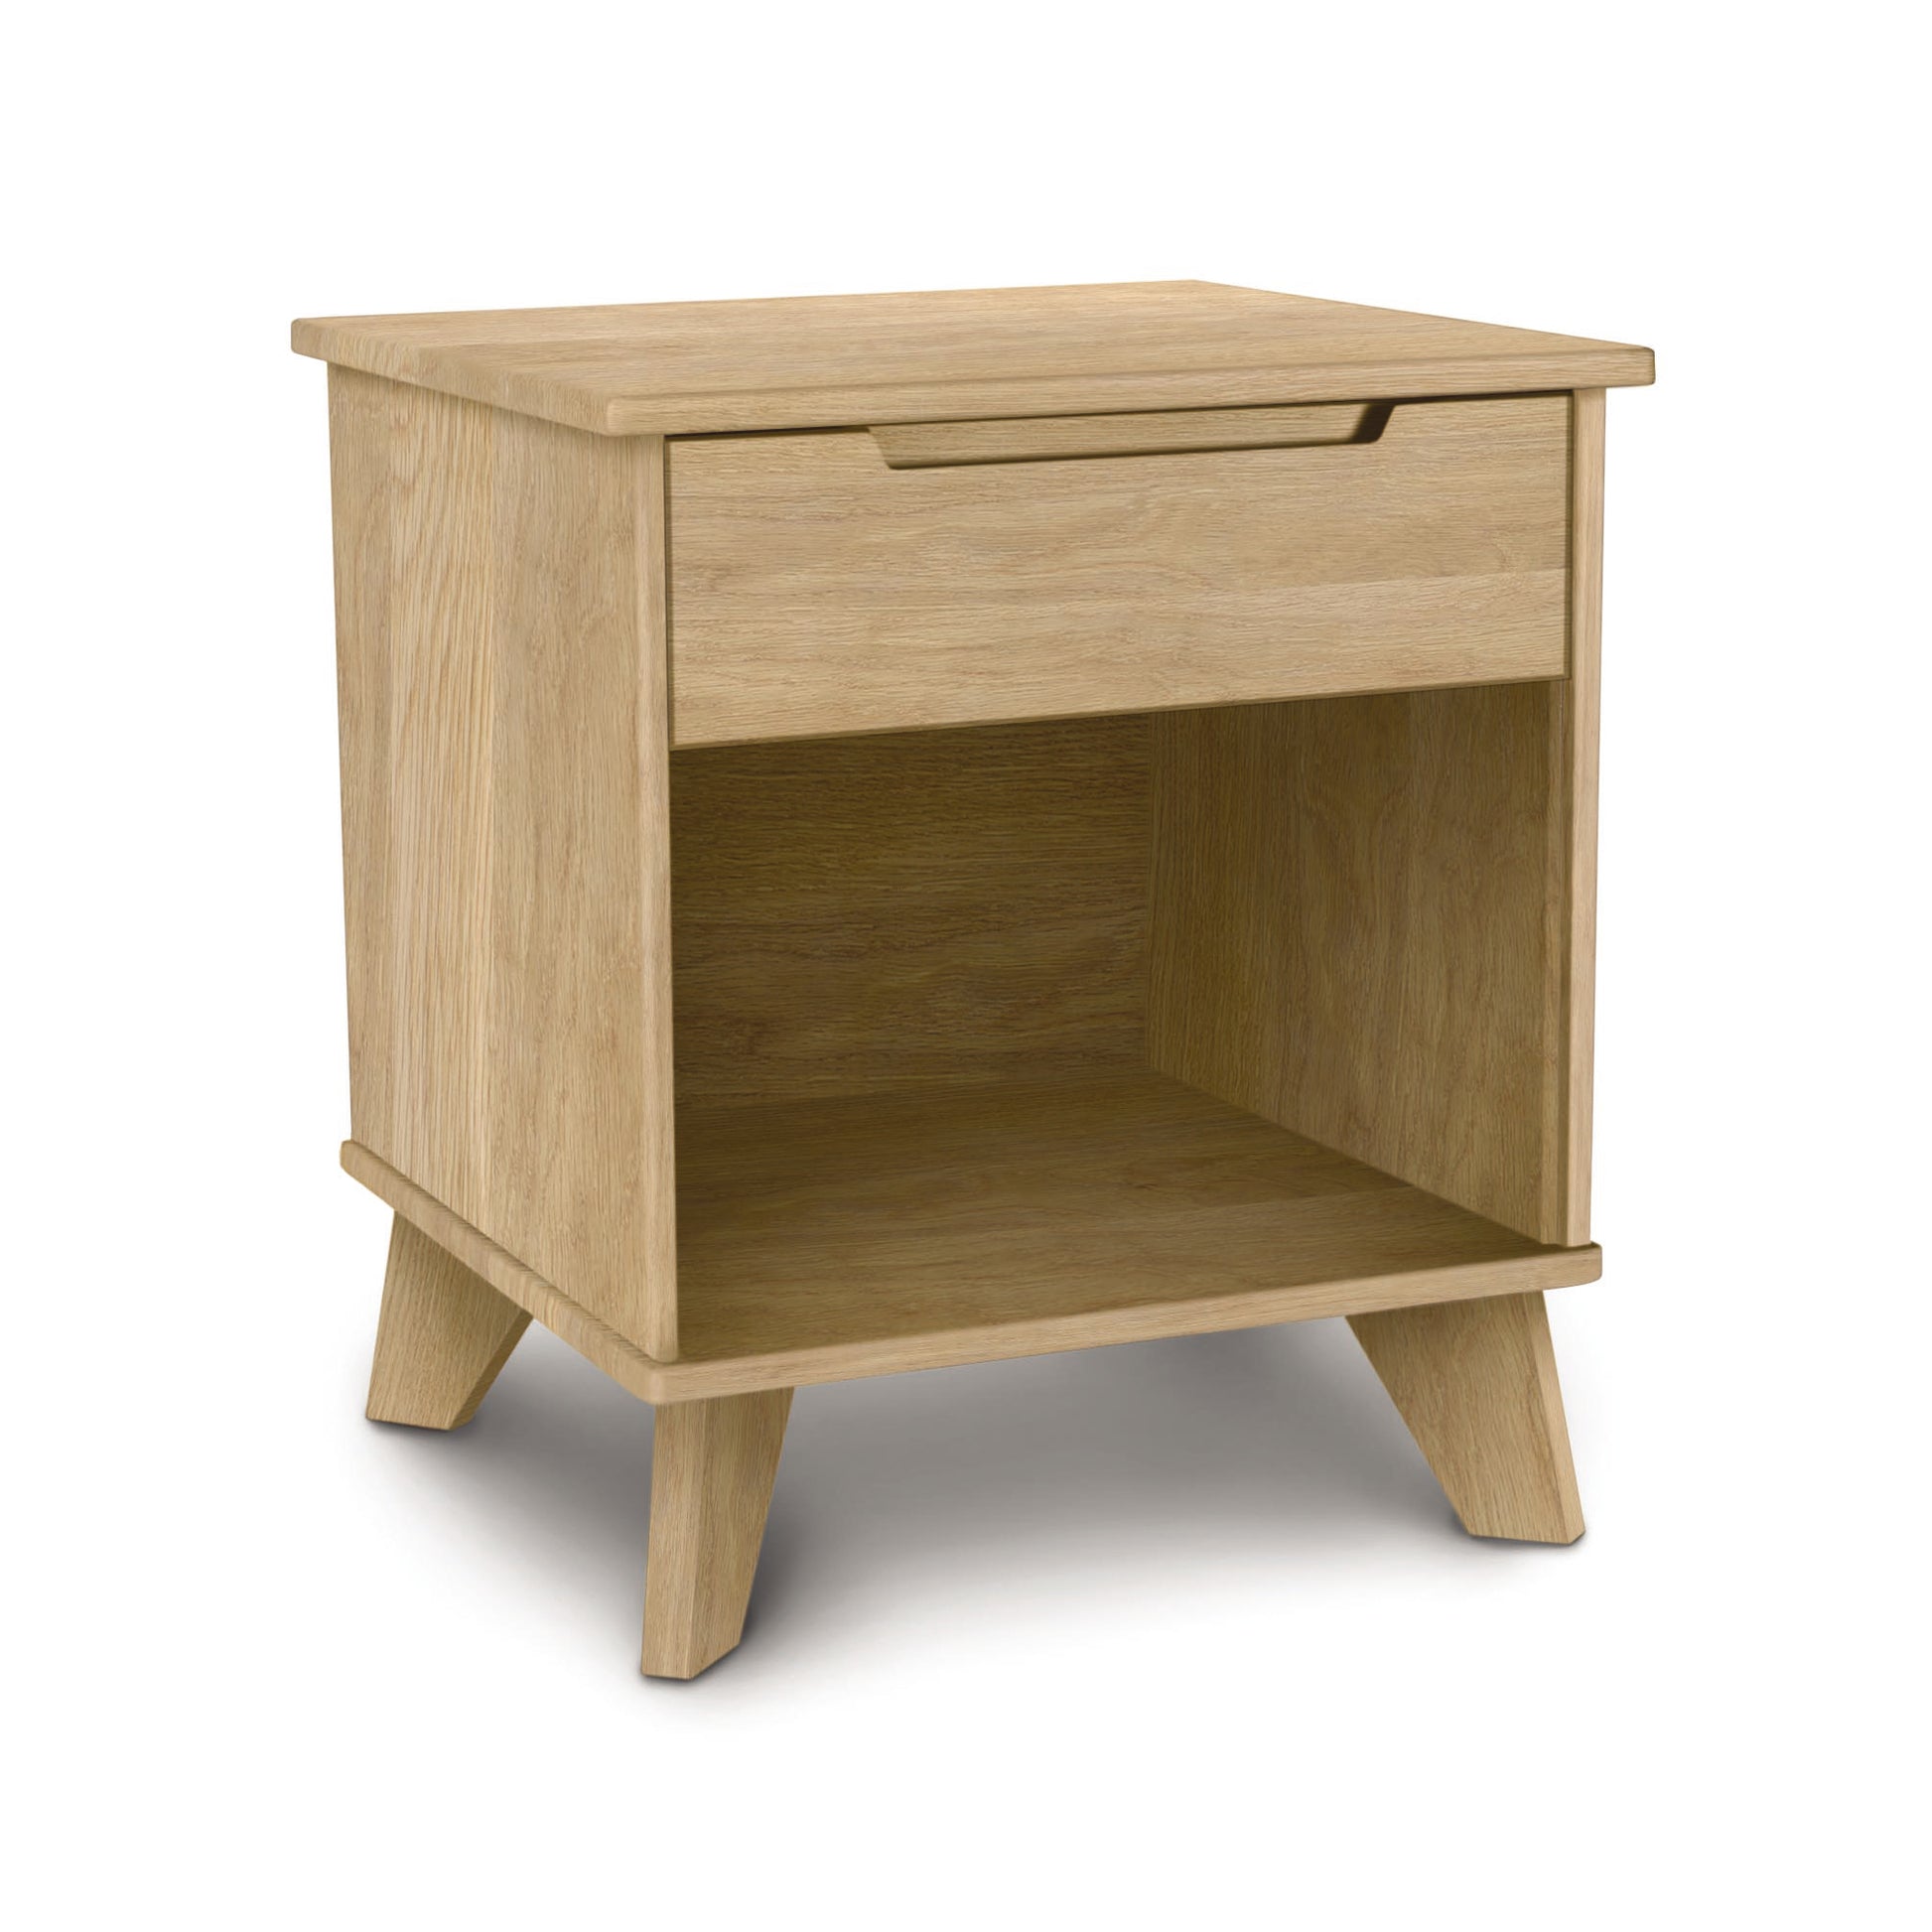 A sustainable Linn 1-Drawer Enclosed Shelf Nightstand manufactured by Copeland Furniture.